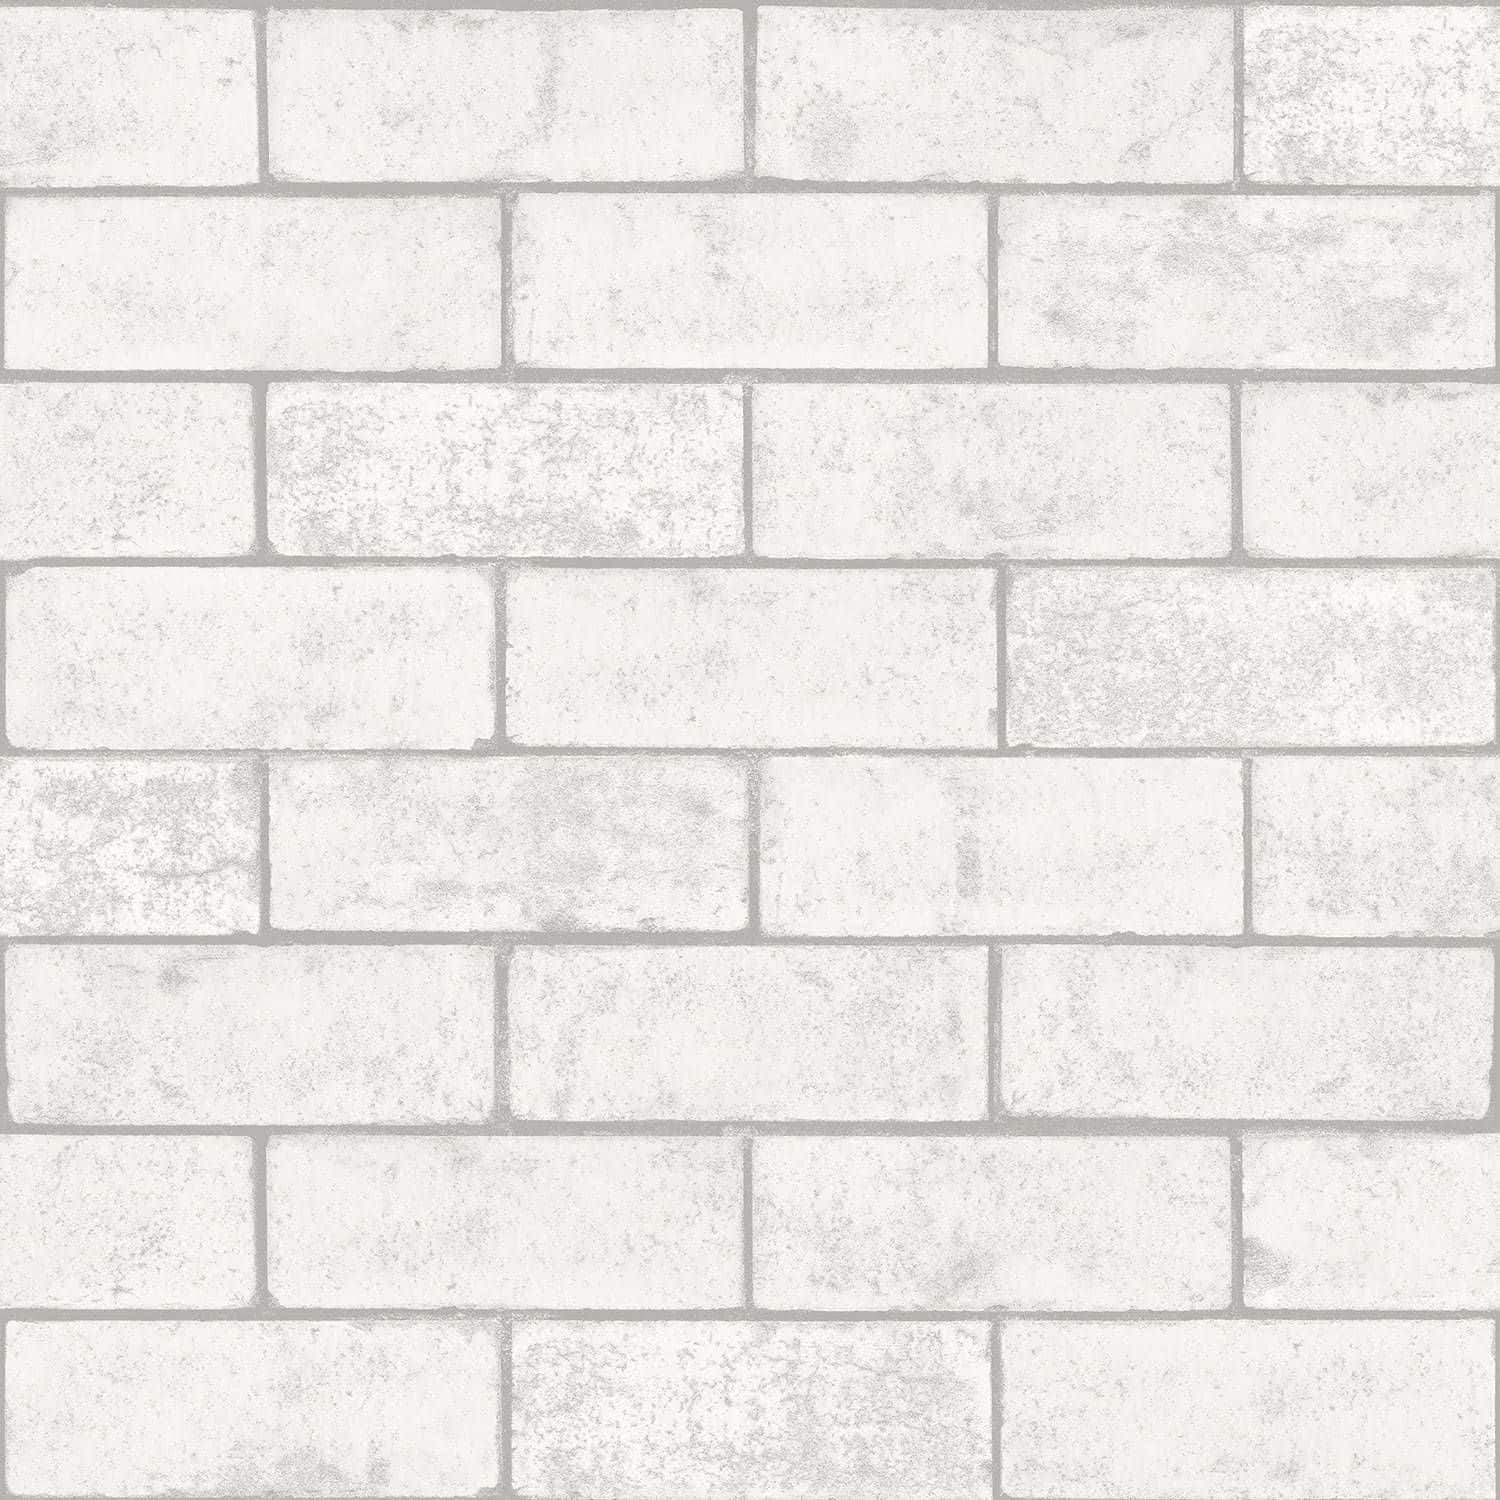 A whitewashed brick wall with a textured and abstract background